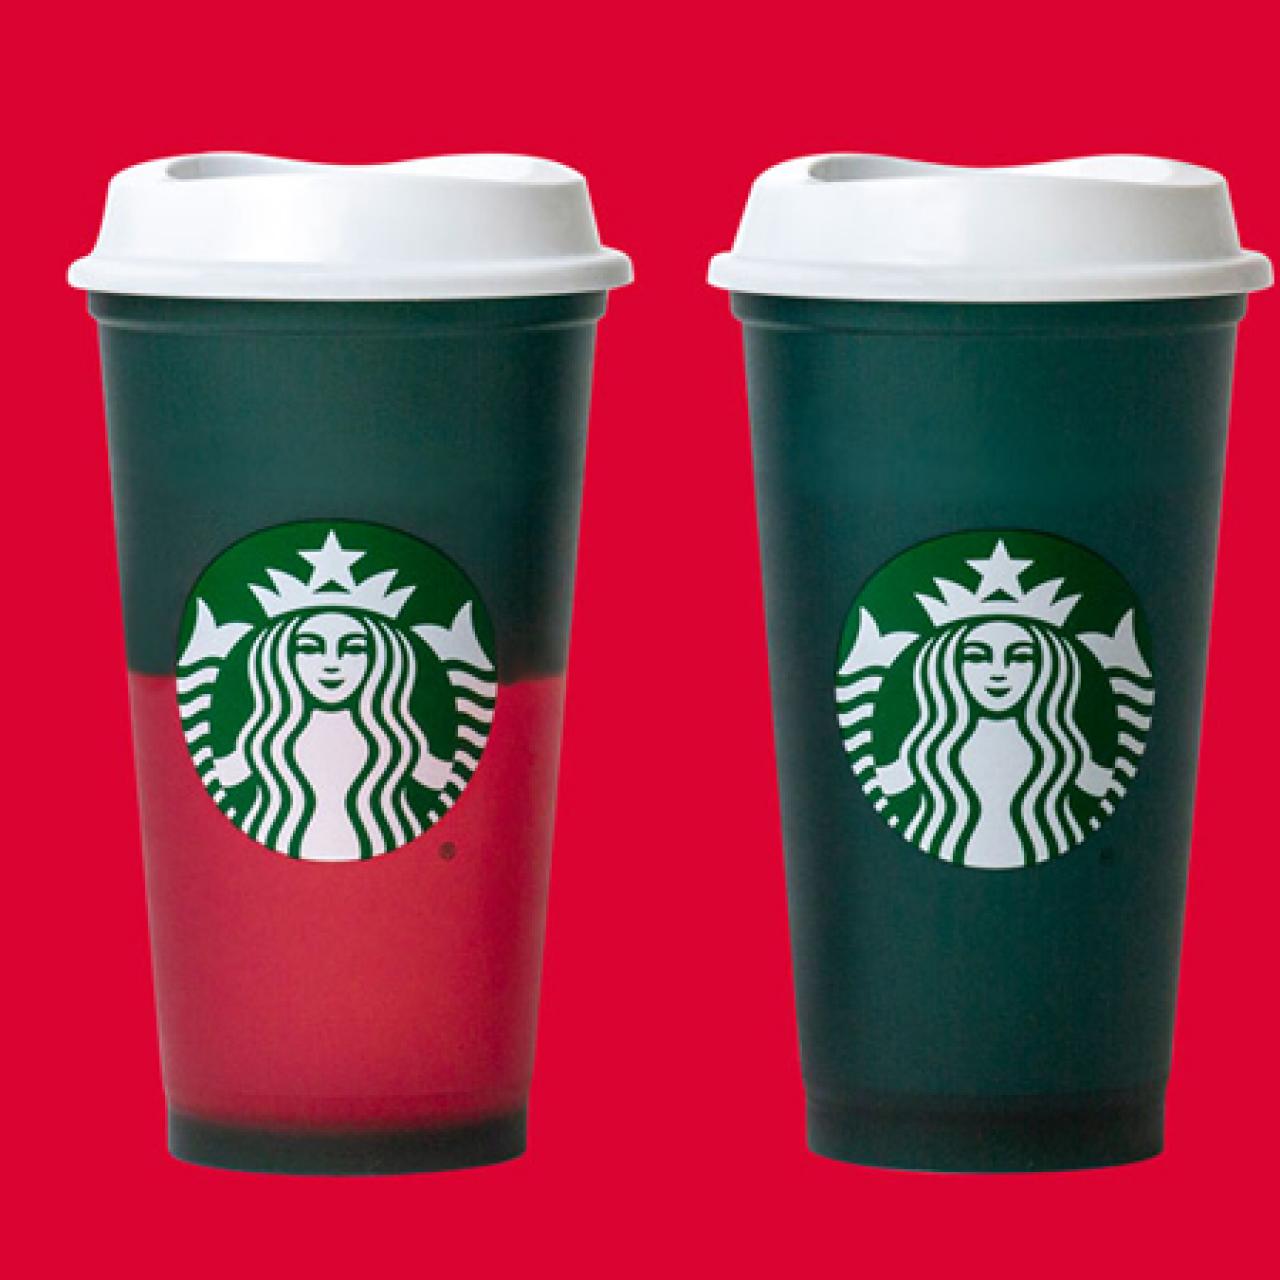 Red Cup Day at Starbucks is expected to be this week